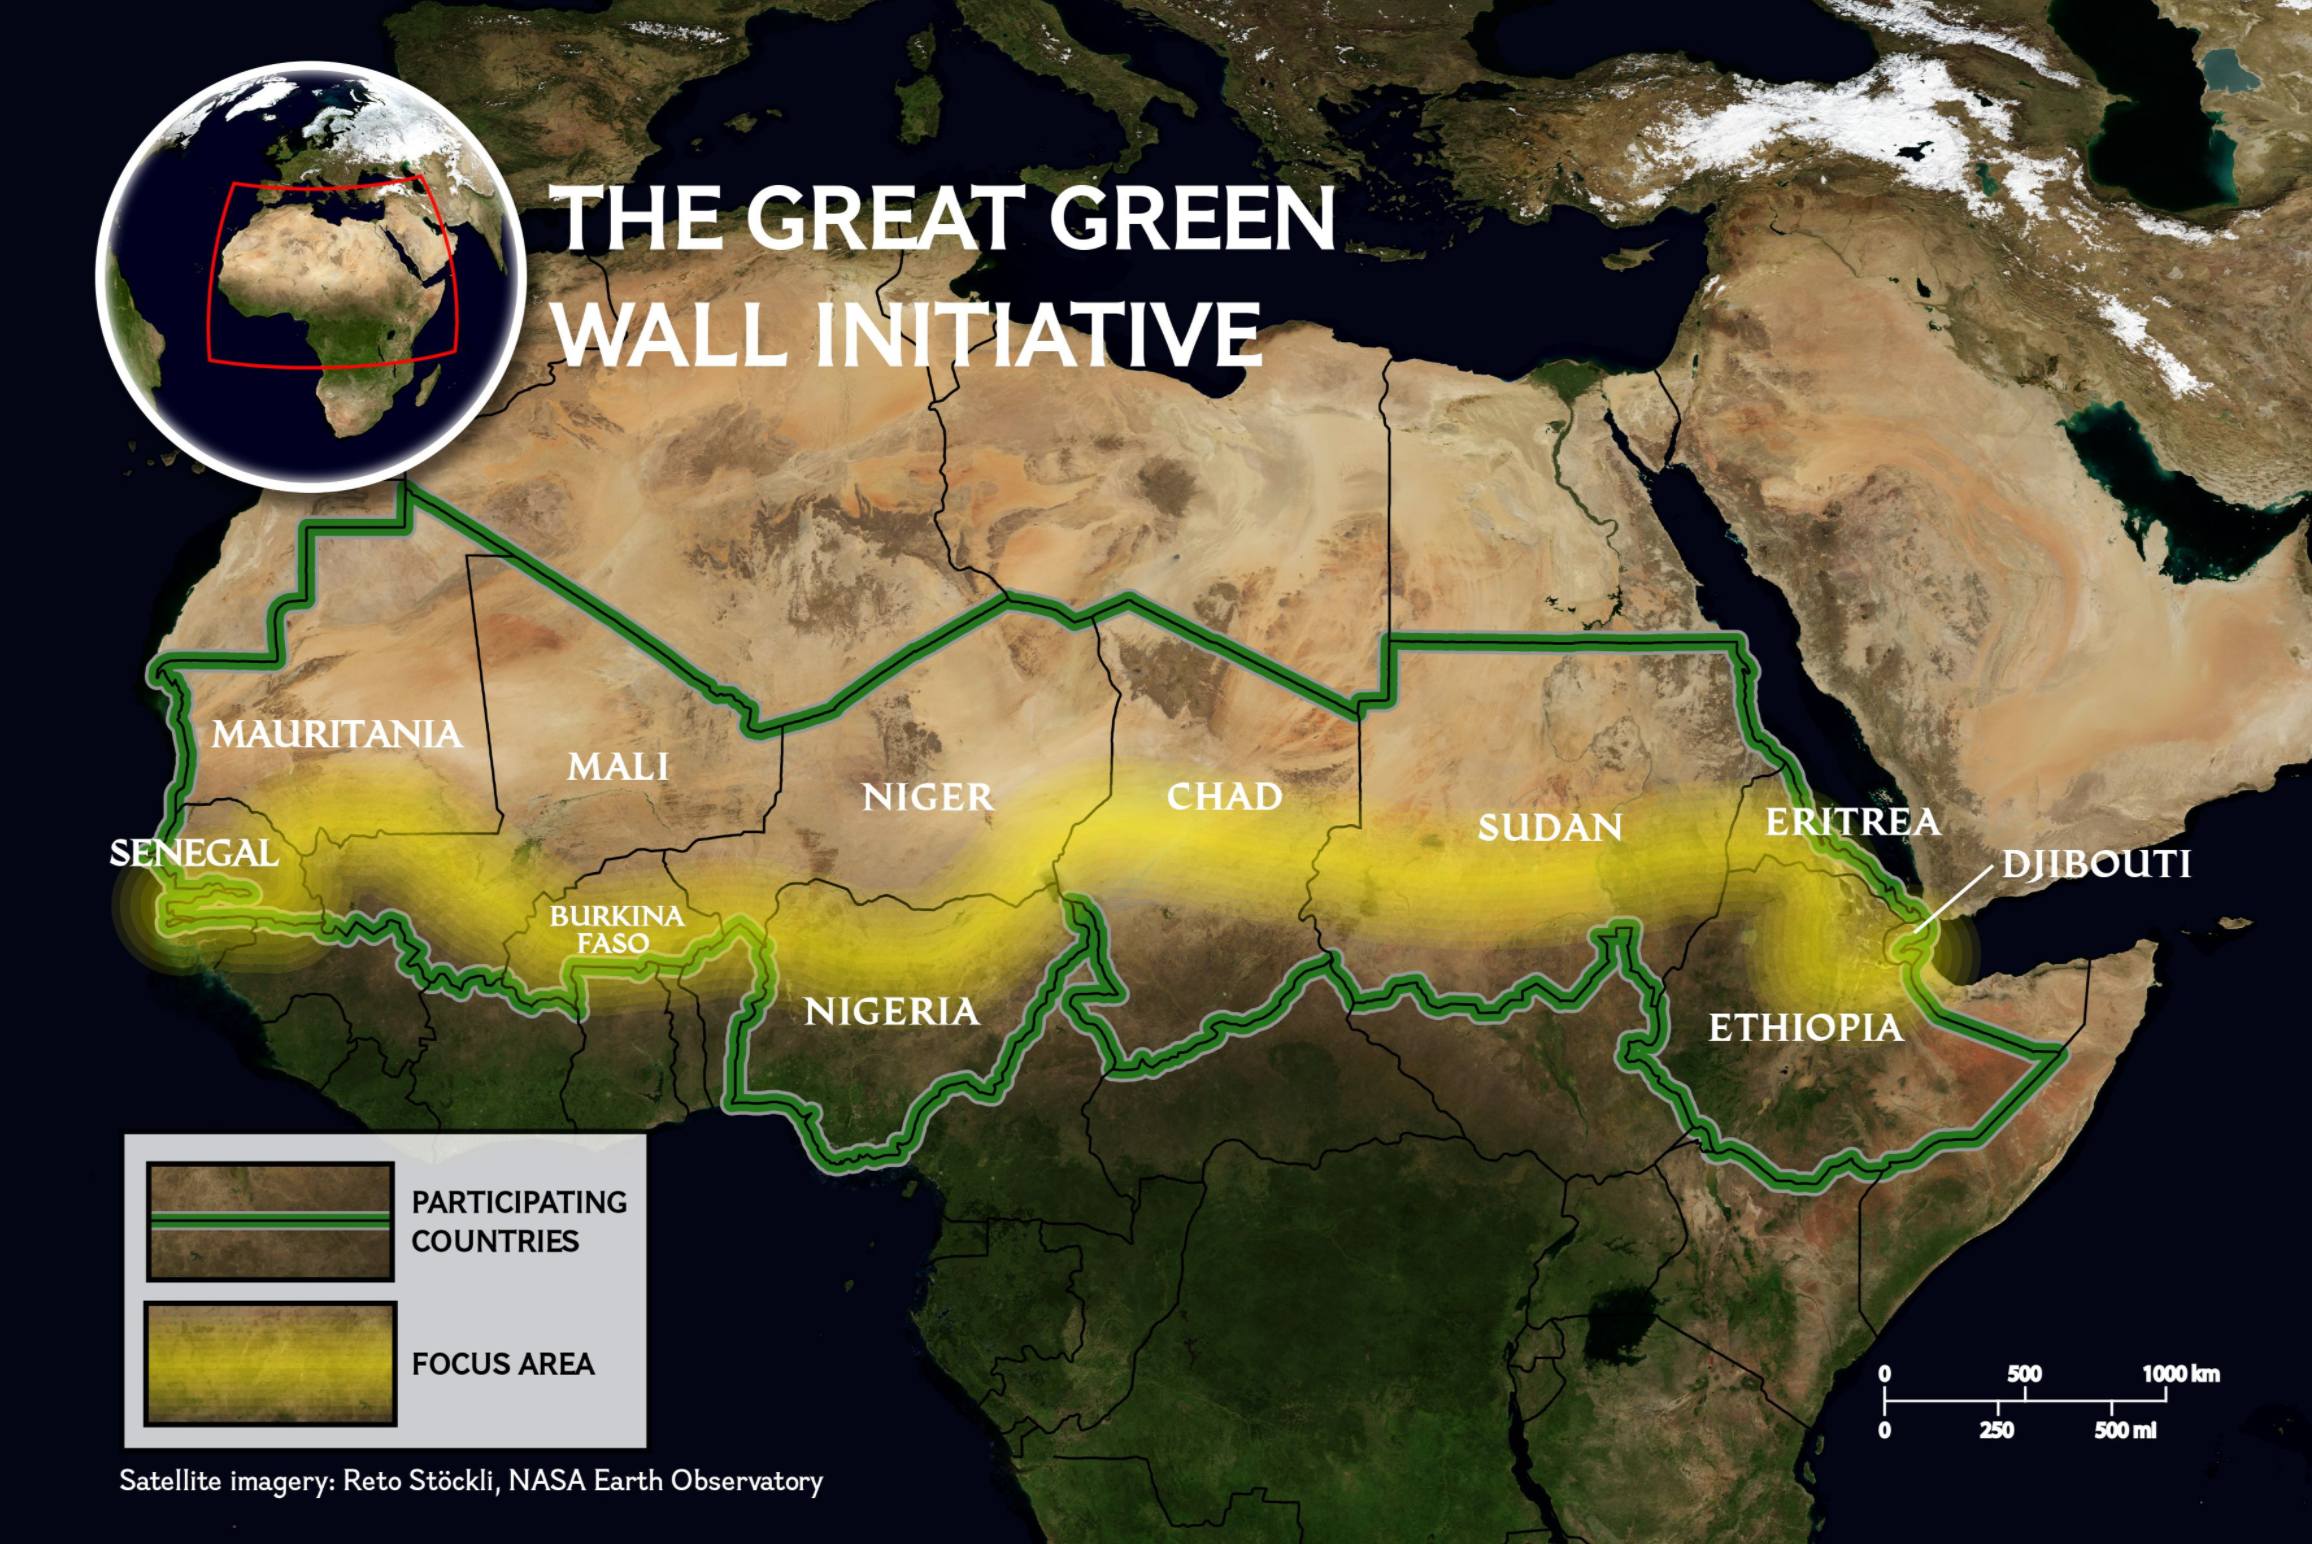 Africa’s ambitious project to re-green the Sahel region, called the ‘Great Green Wall’